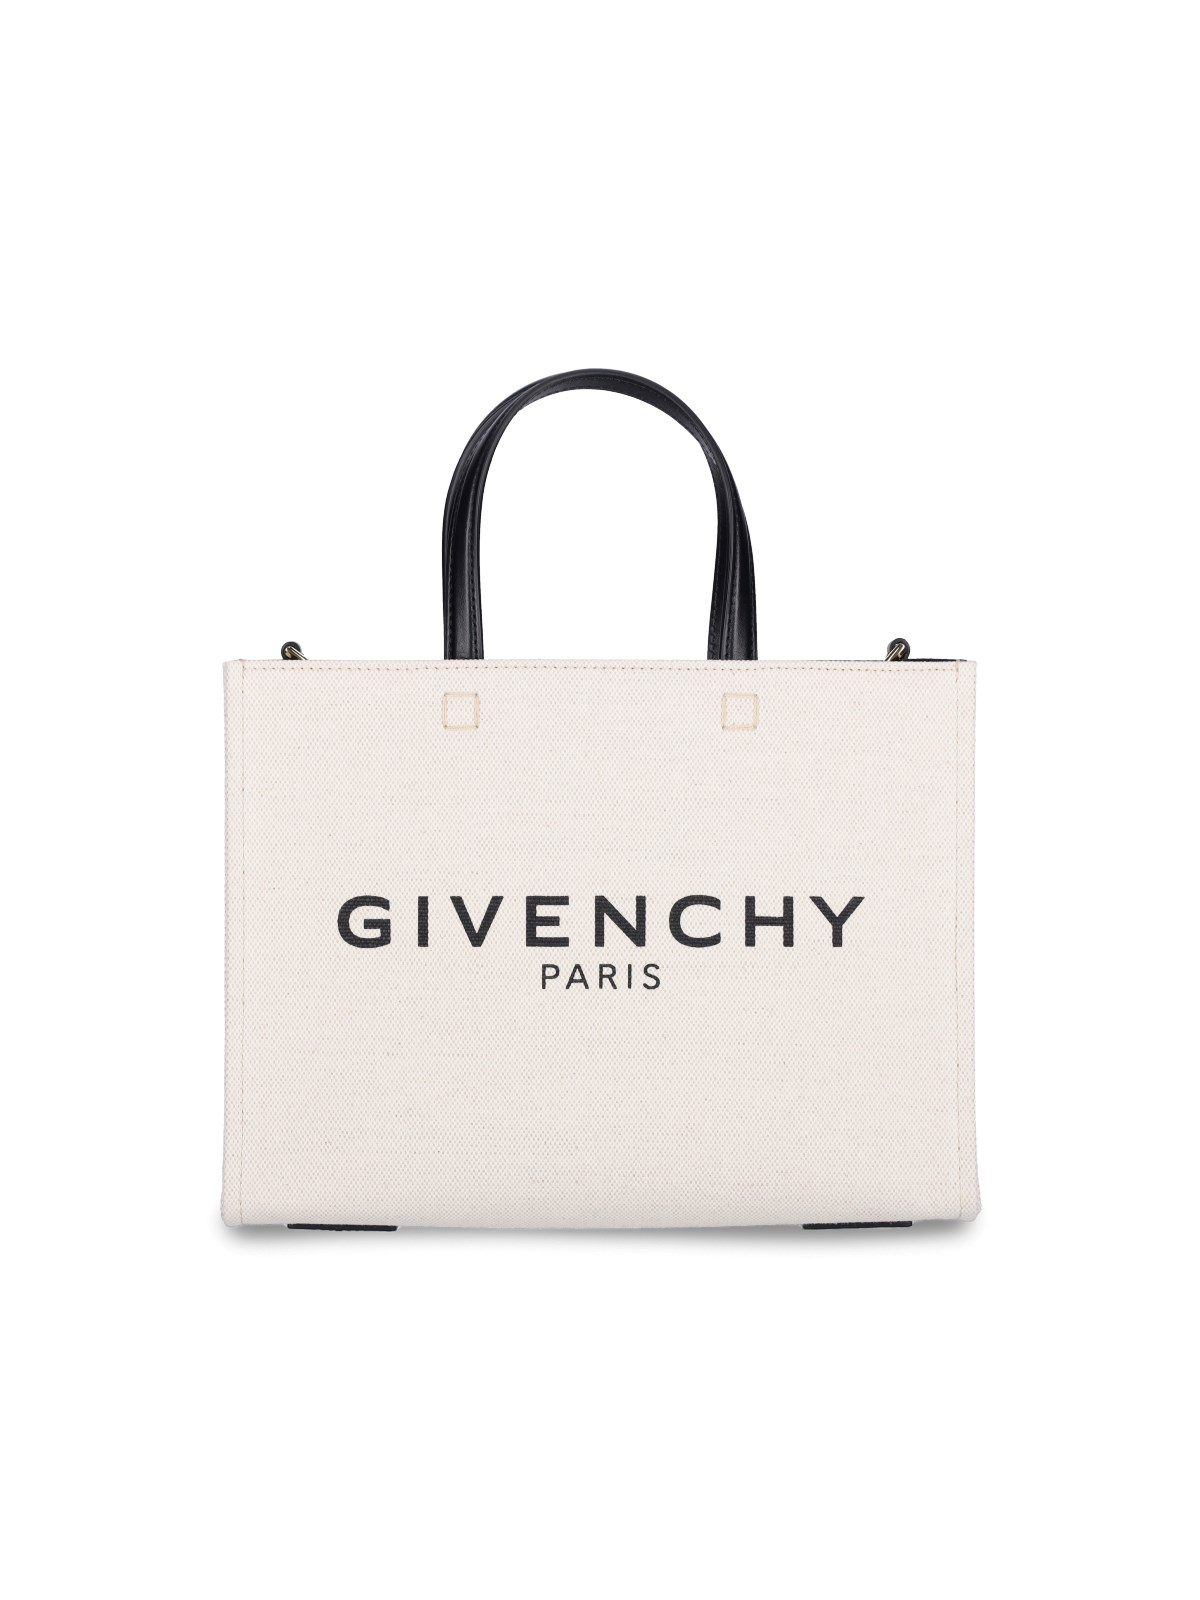 Givenchy 'g' Small Tote Bag In Cream